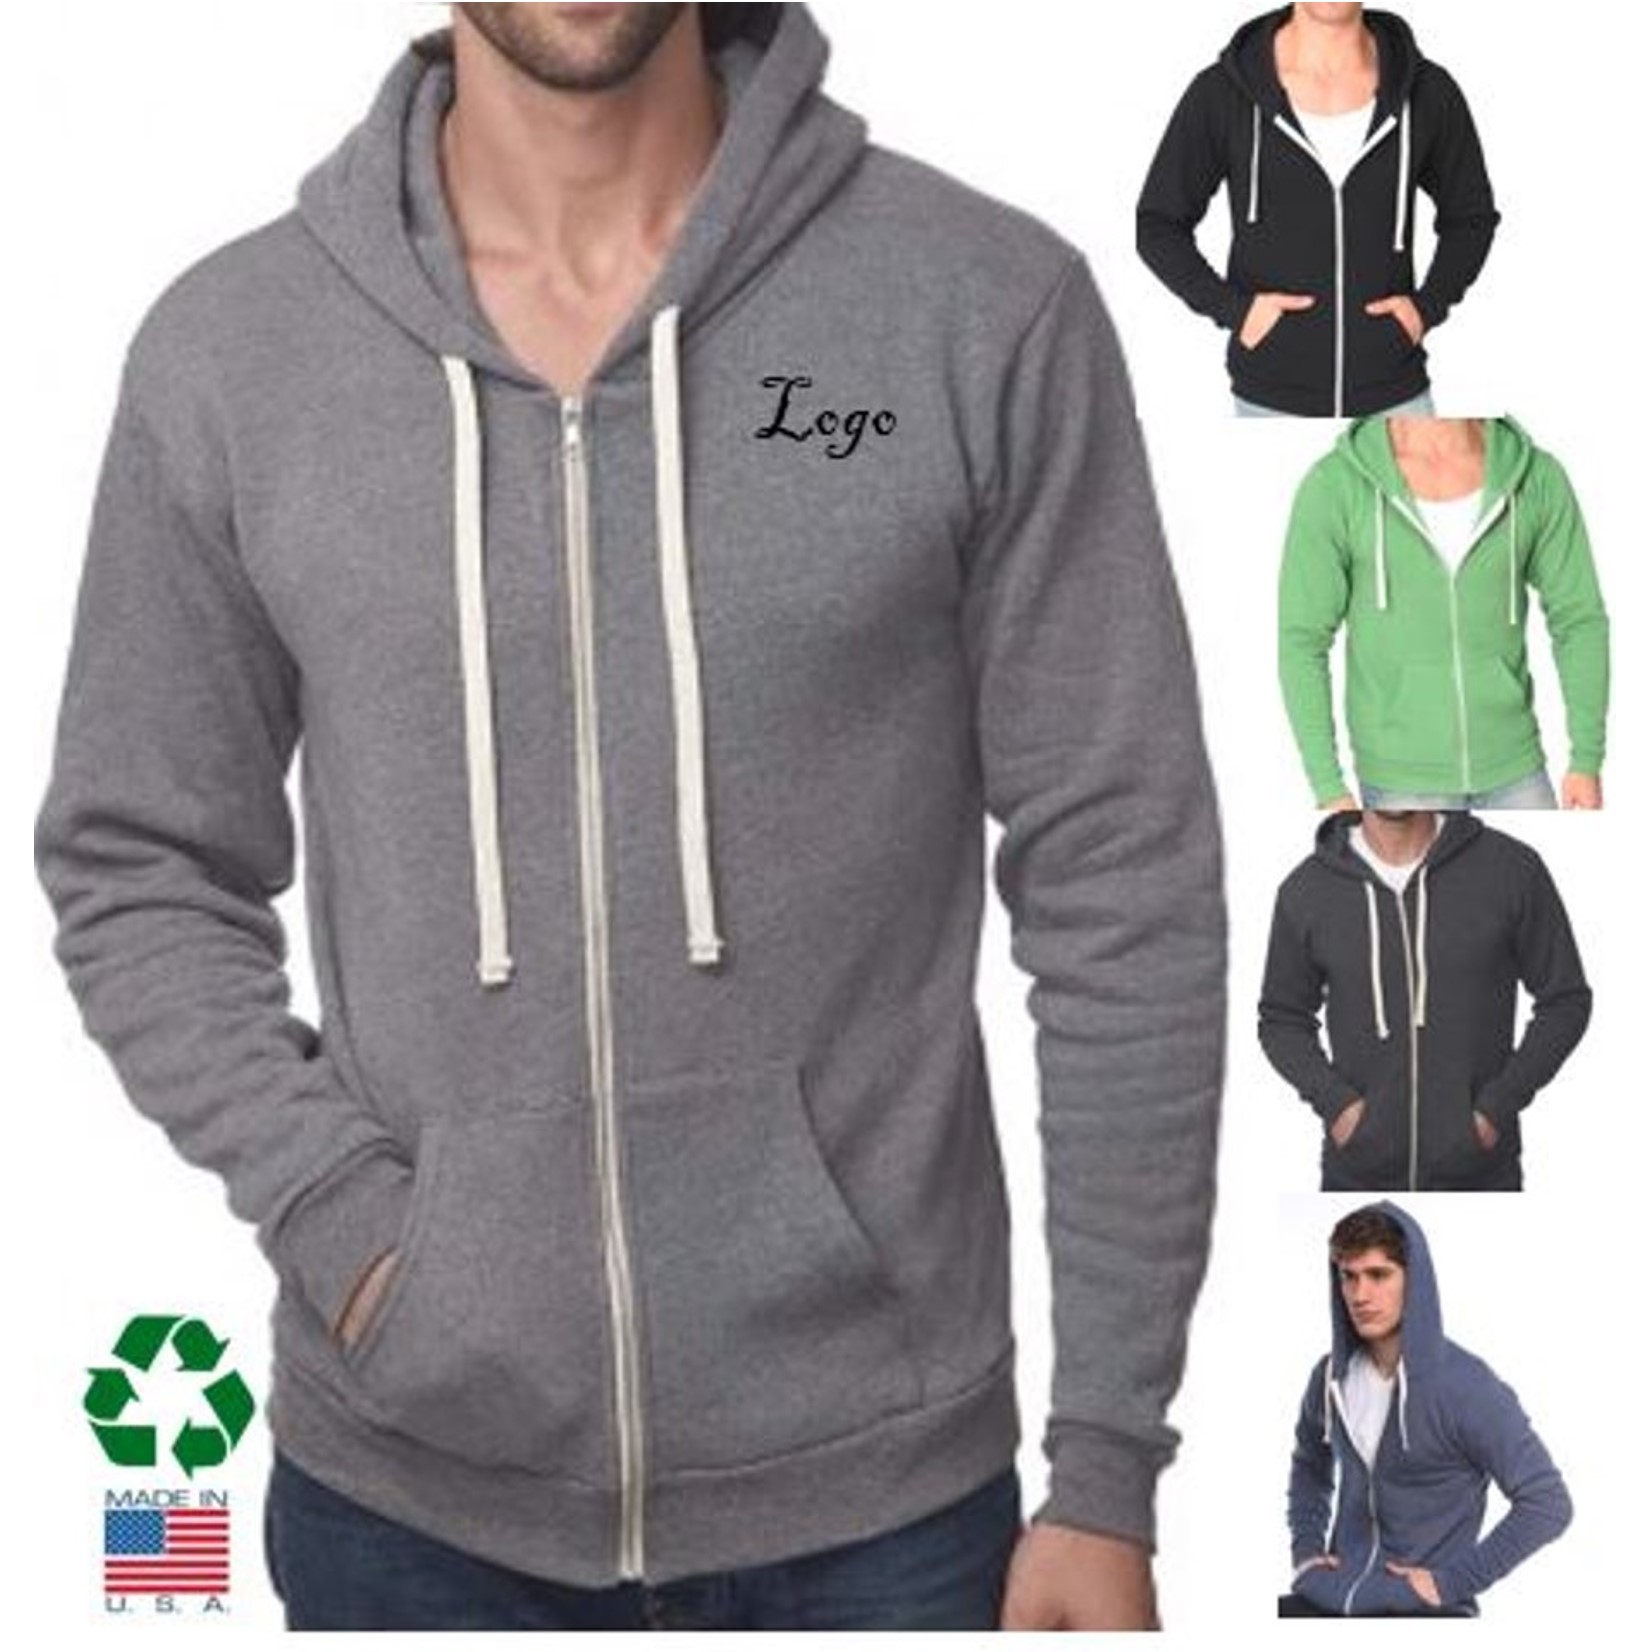 Eco Unisex Recycled Organic USA Made Full-Zip Hoodie branded